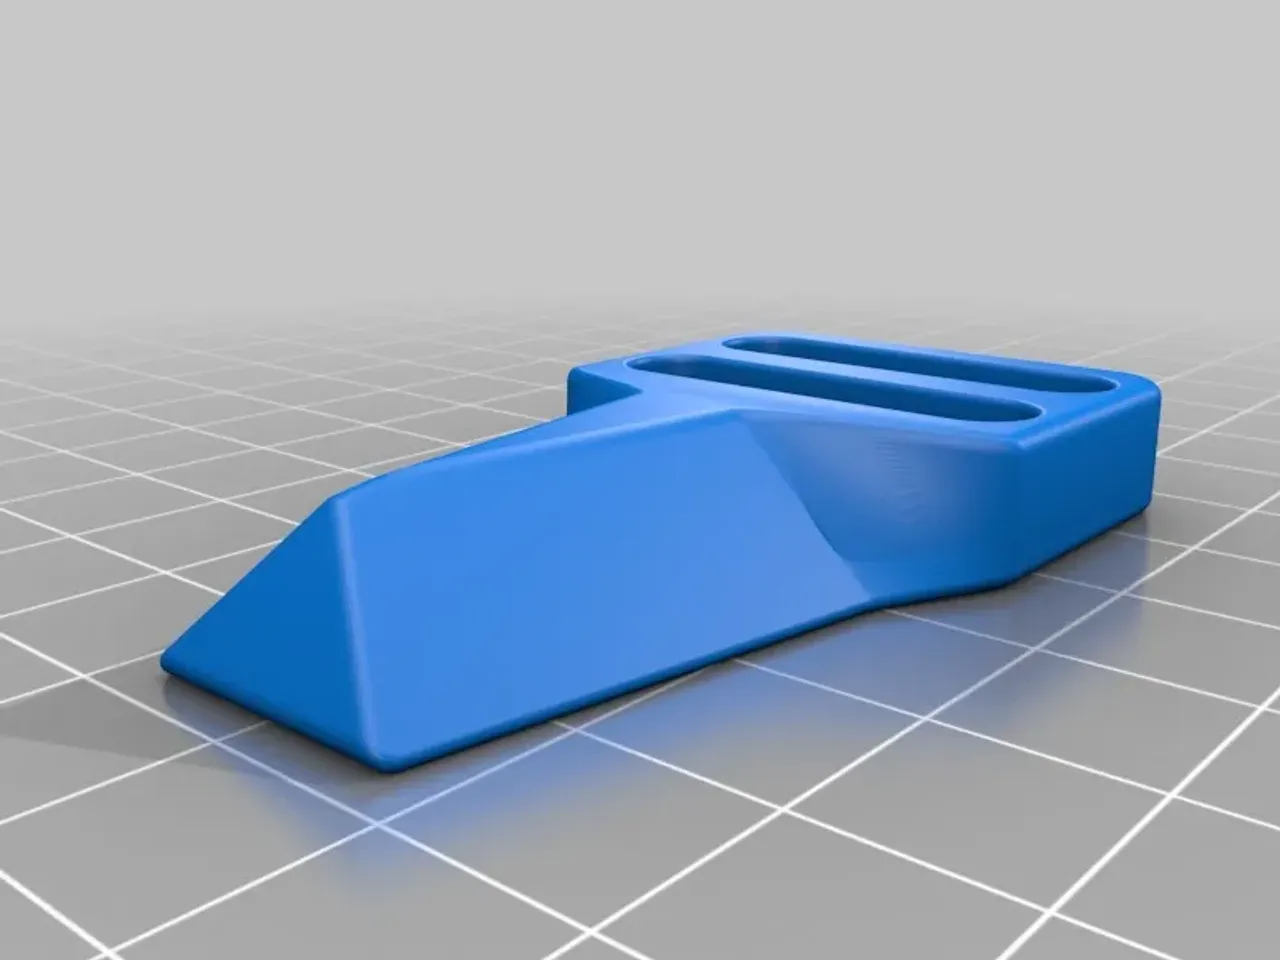 Buckle - 3D Print your own replacement by Proto3000 - Thingiverse